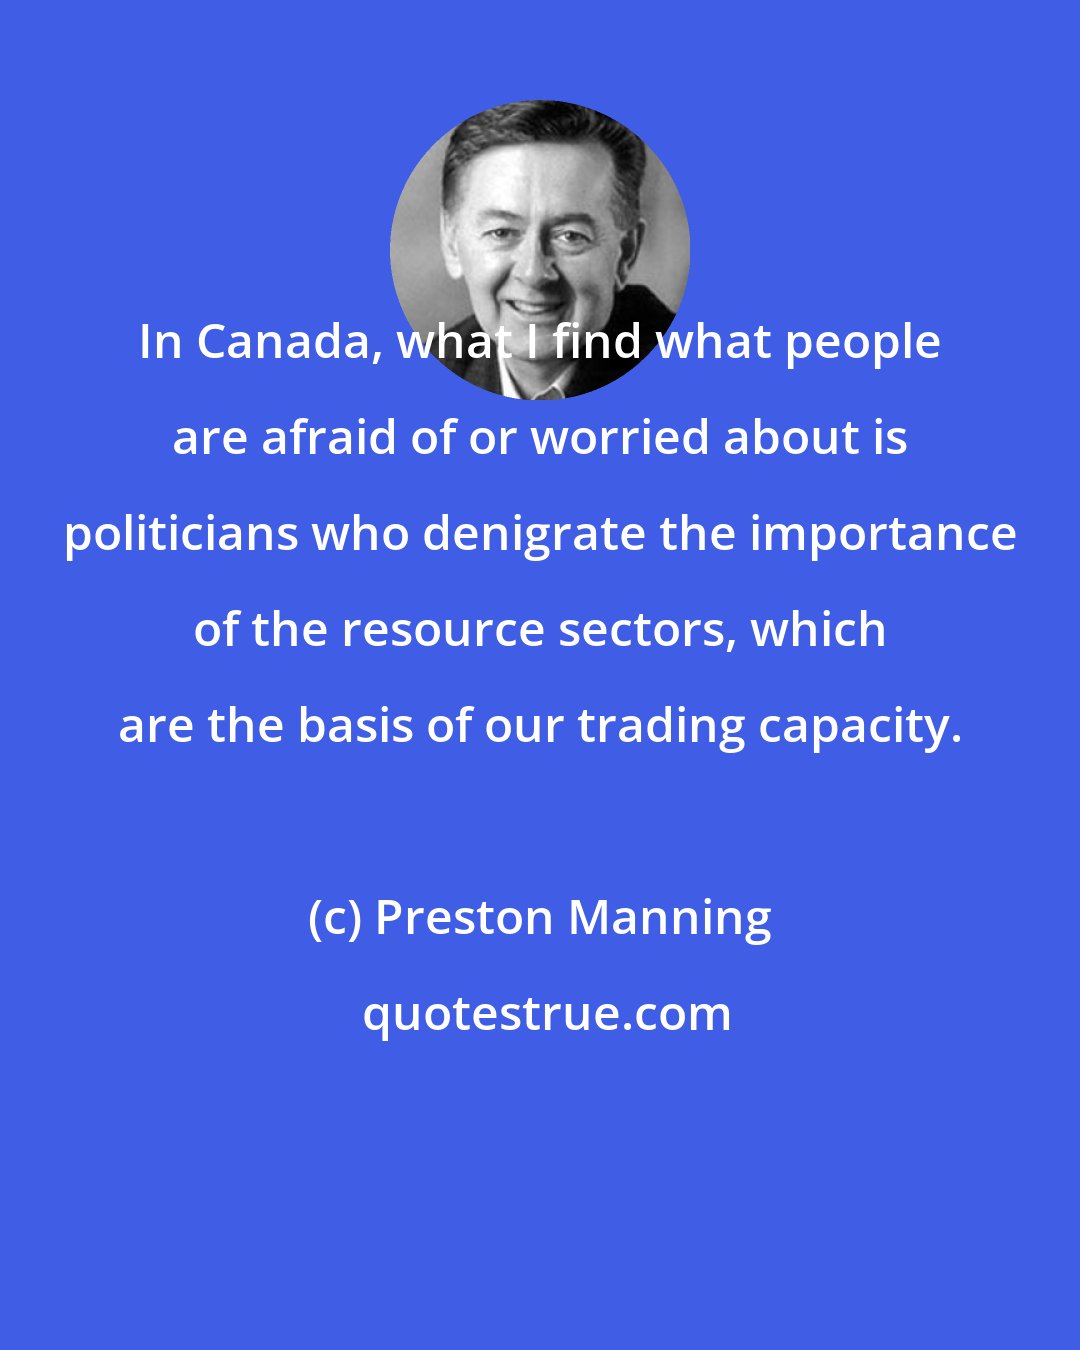 Preston Manning: In Canada, what I find what people are afraid of or worried about is politicians who denigrate the importance of the resource sectors, which are the basis of our trading capacity.